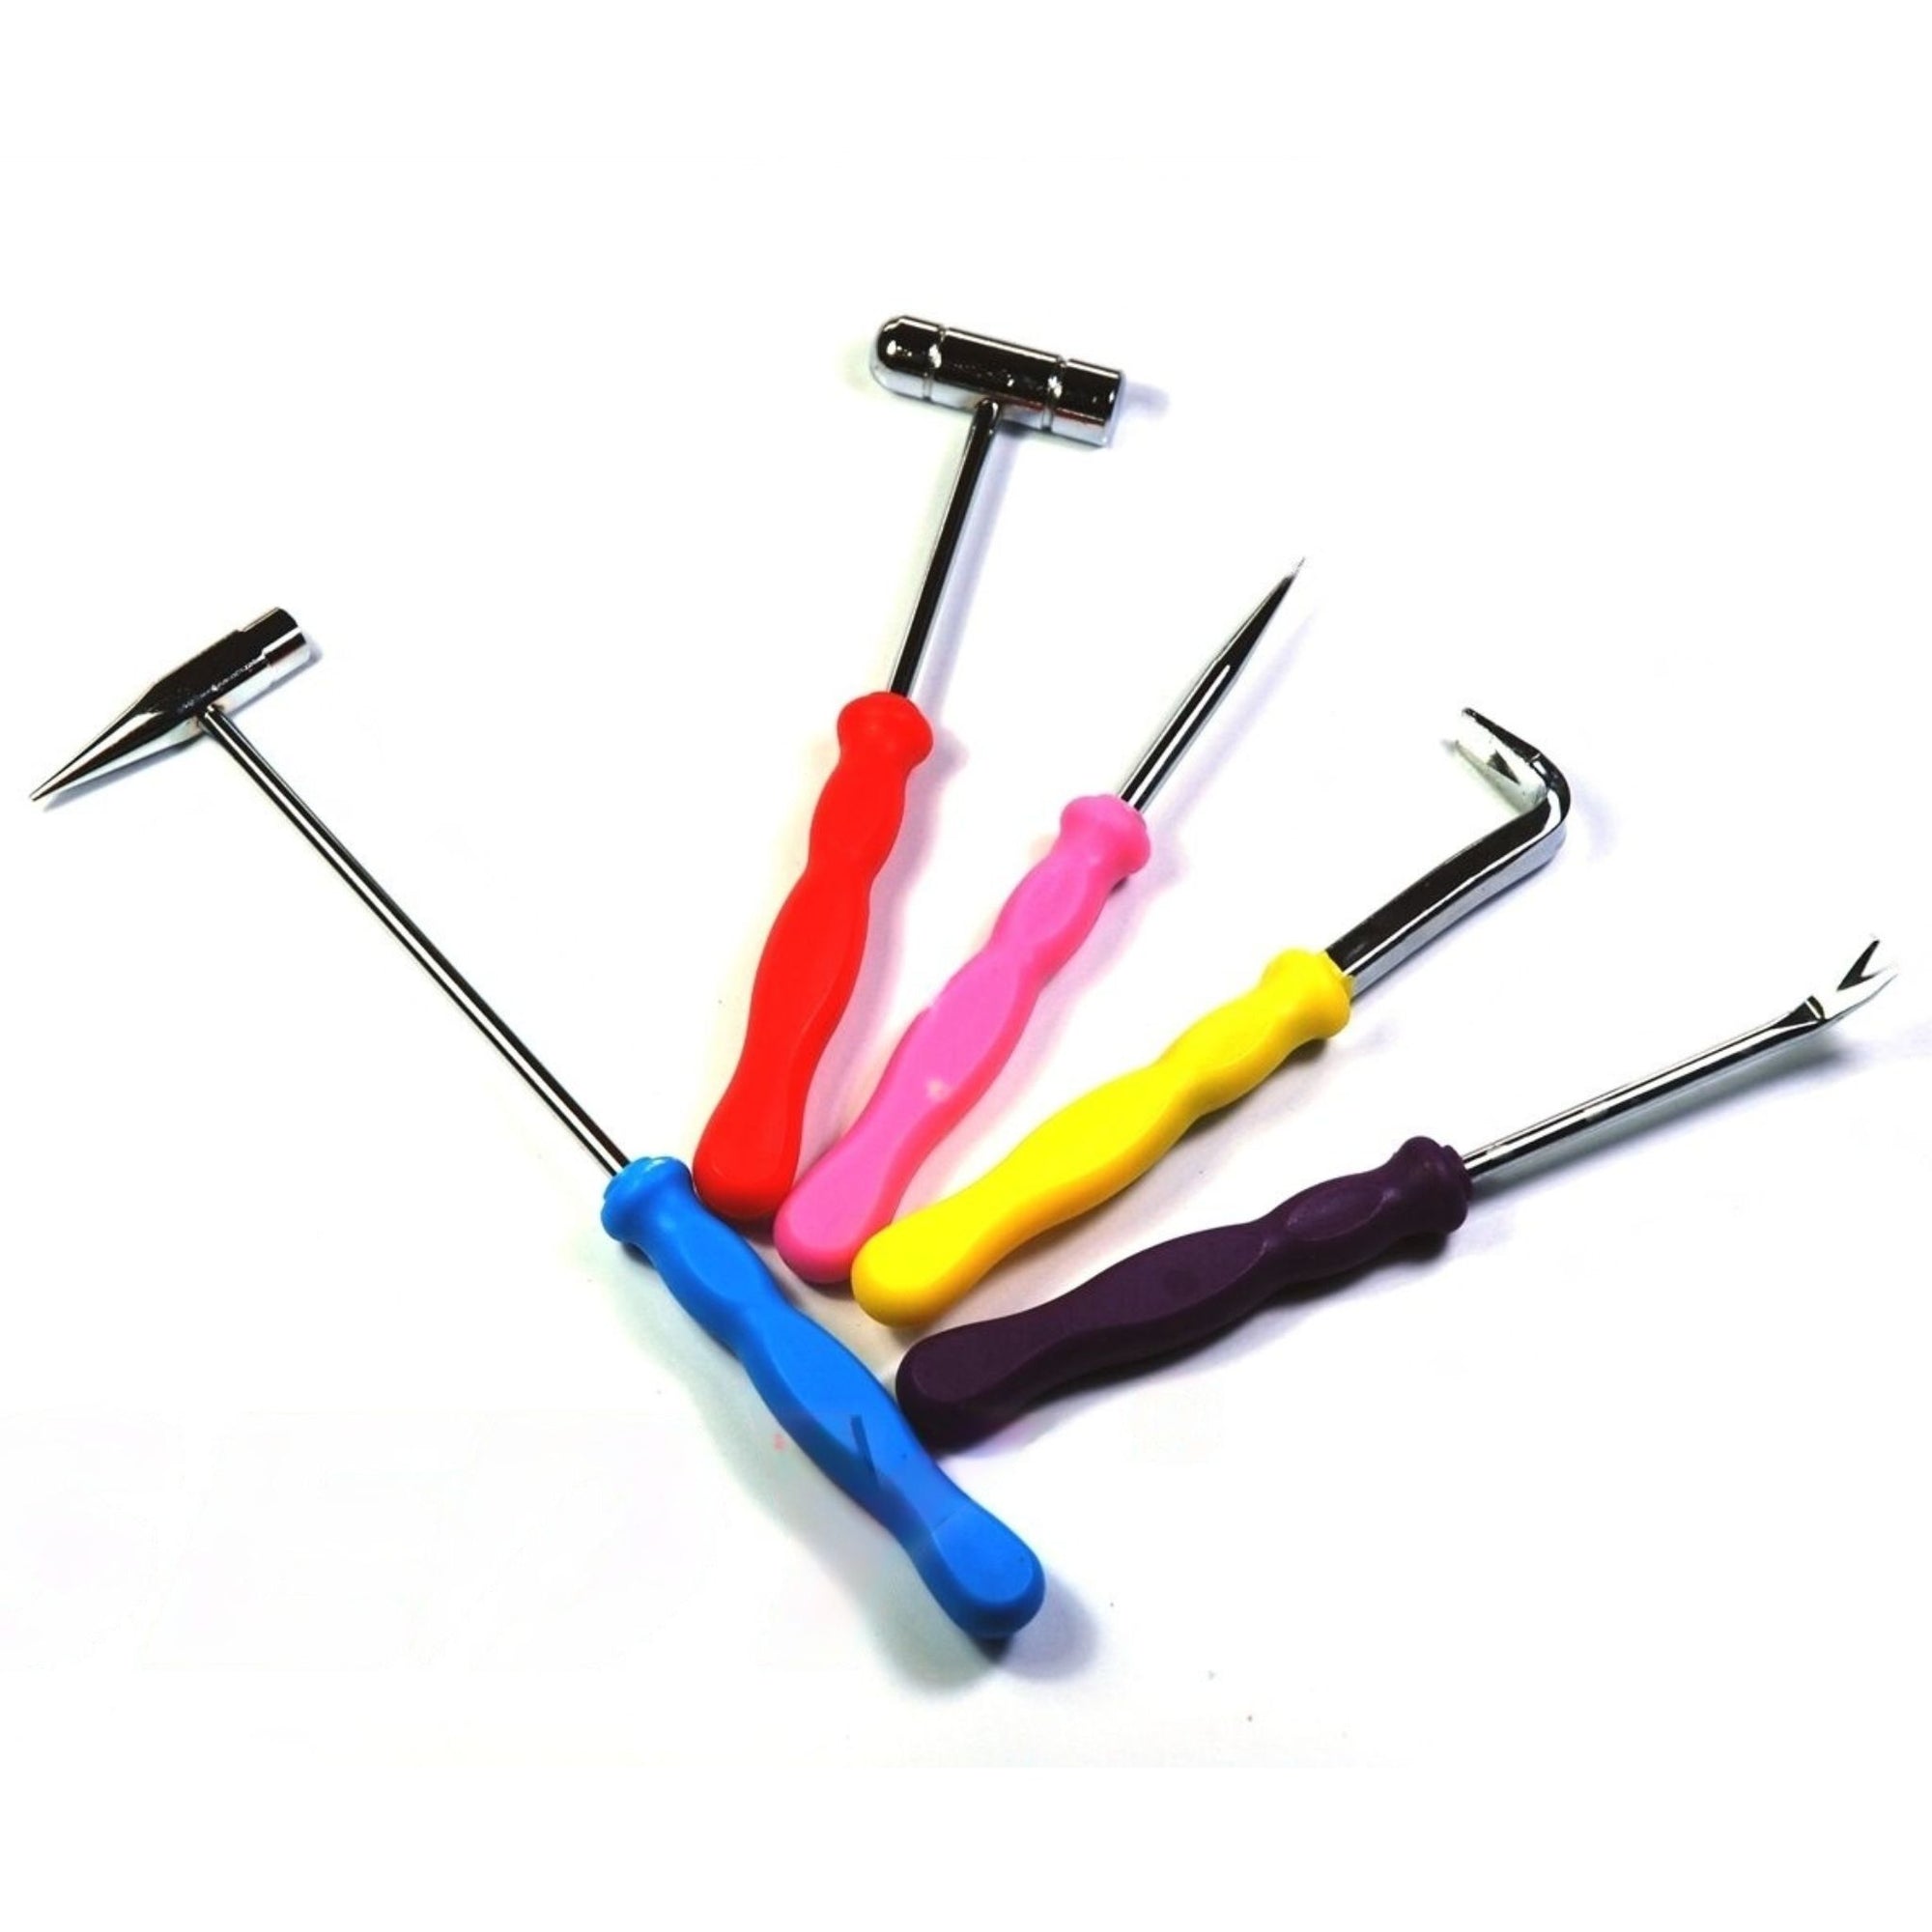 5 piece mini household tool kit - South East Clearance Centre